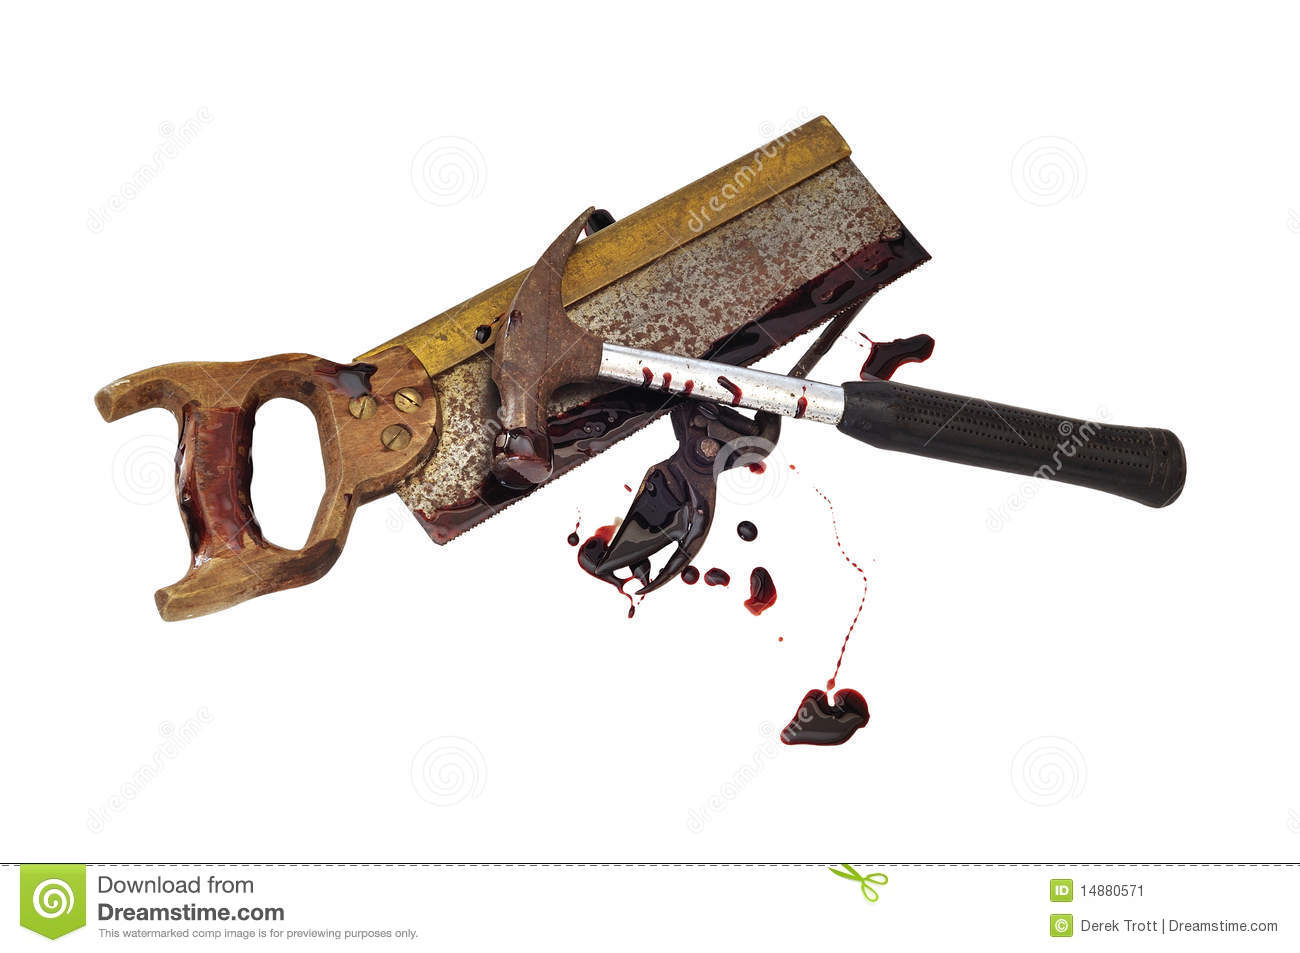 Bloody Gory Prunerssaw And Hammer Stock Image   Image  14880571